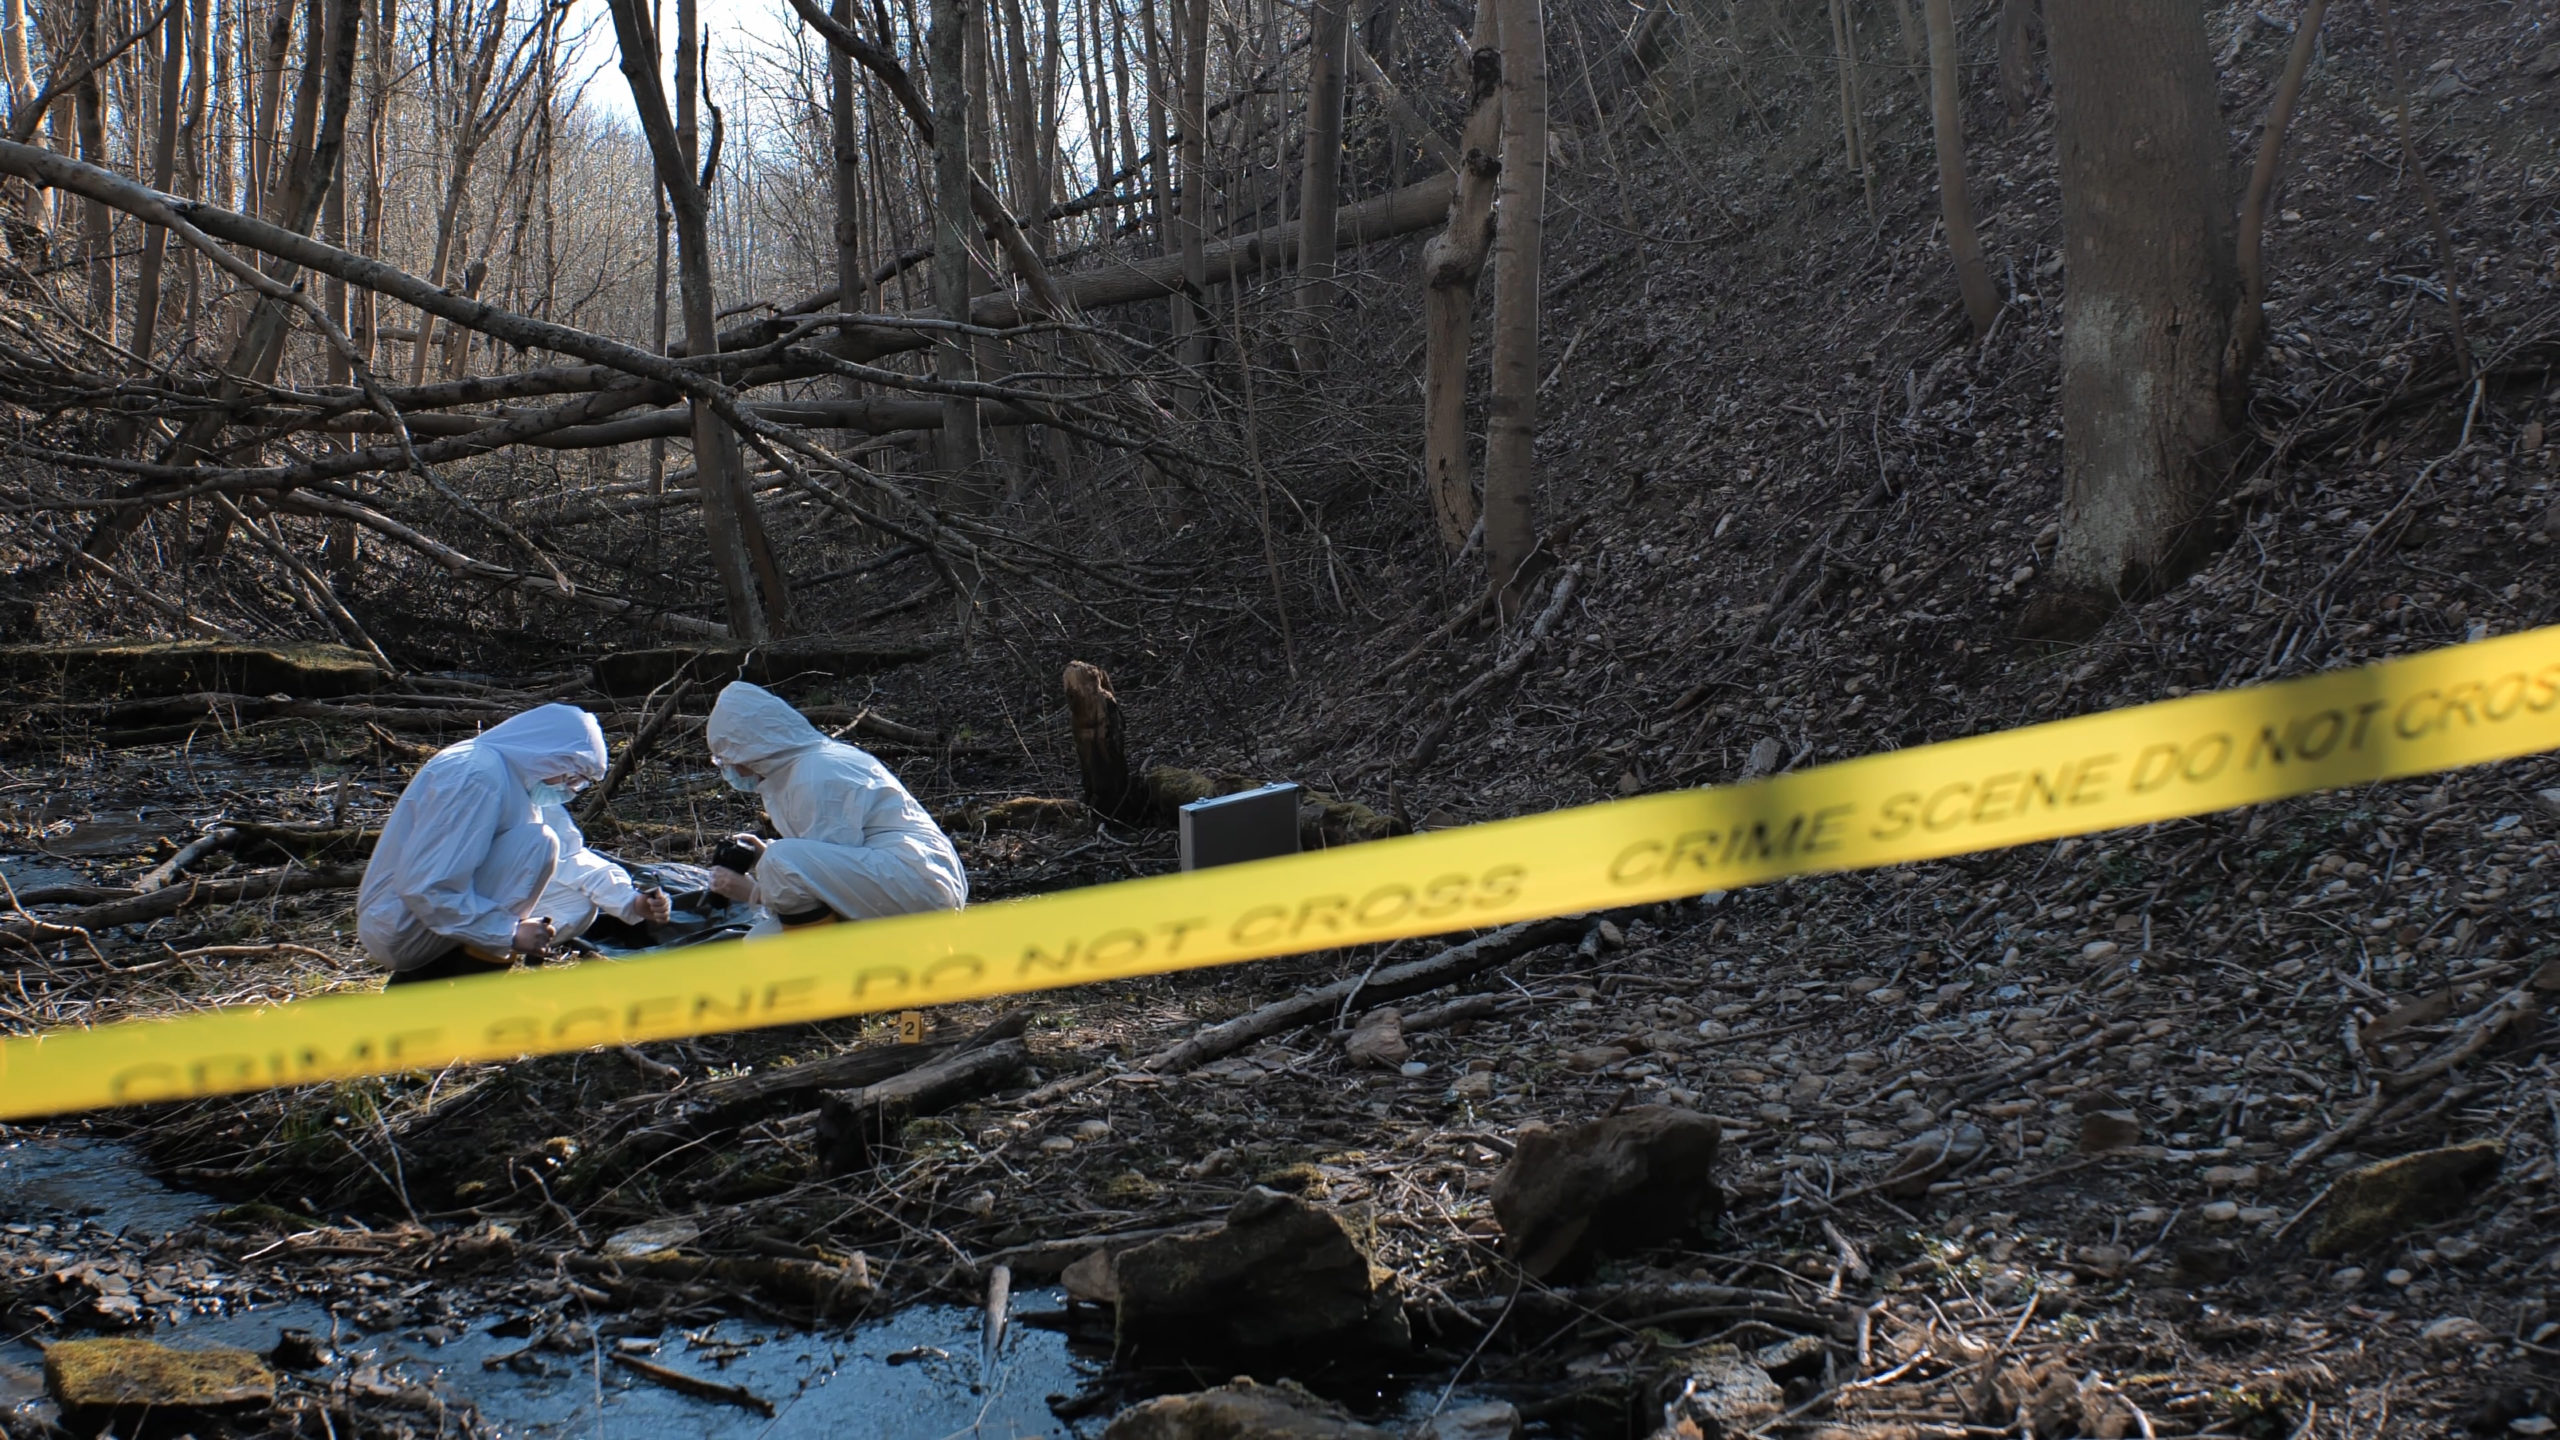 Detectives collecting forensic evidence in woods. This image does not depict the incident mentioned in the story. [Ink Media/Shutterstock]